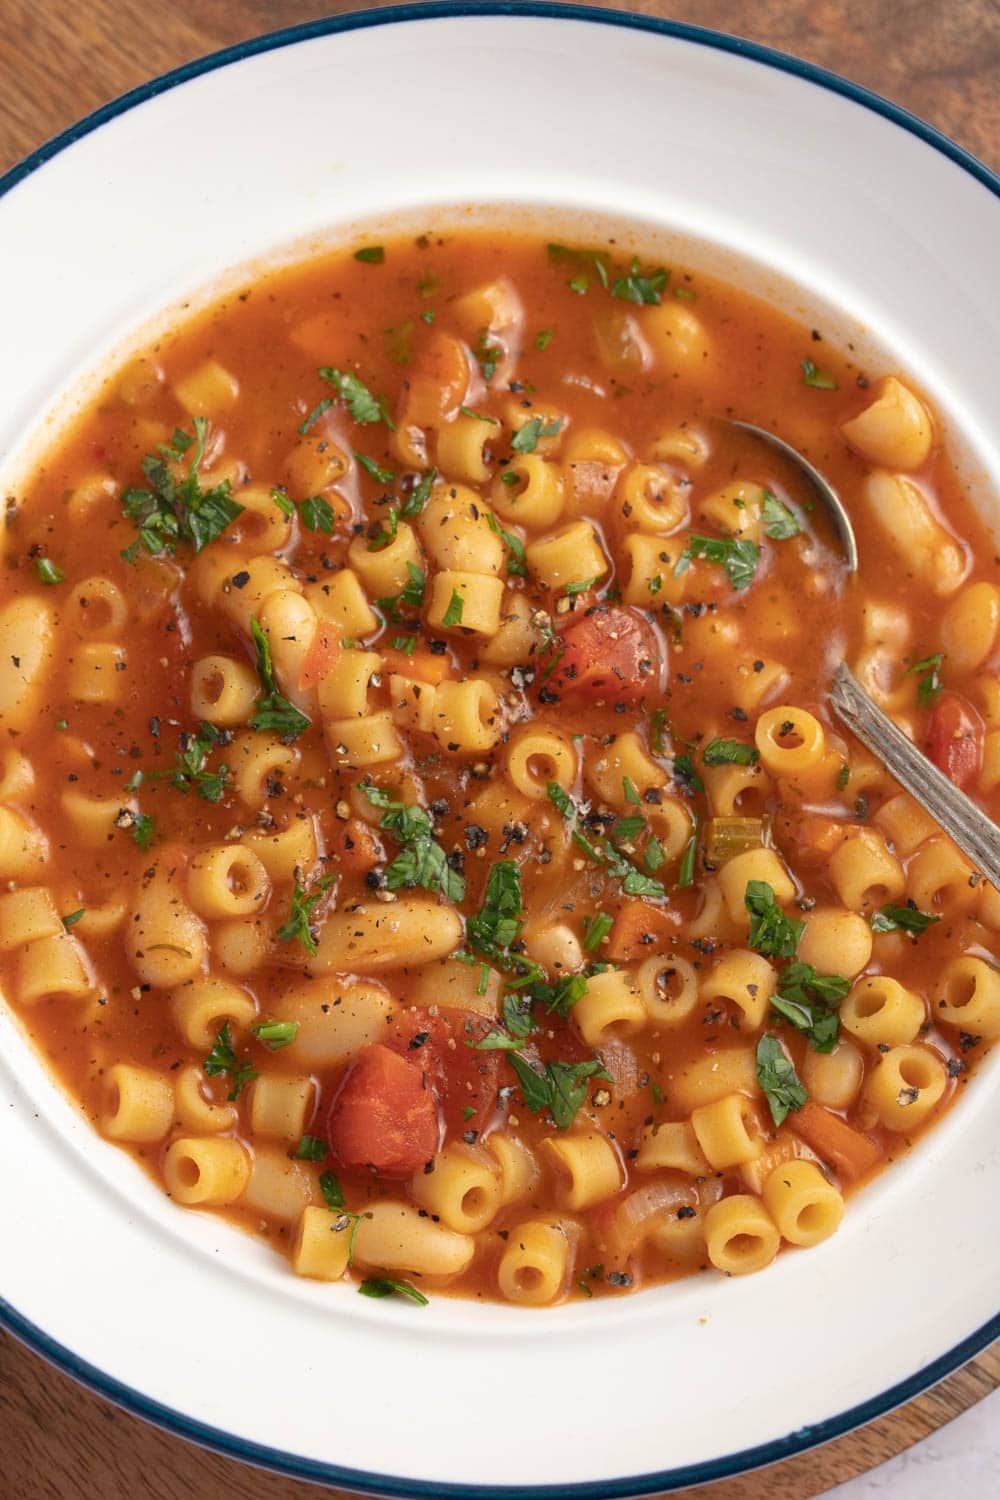 Bowl of Warm Pasta Fagioli Soup with Diced Tomatoes and Parsley